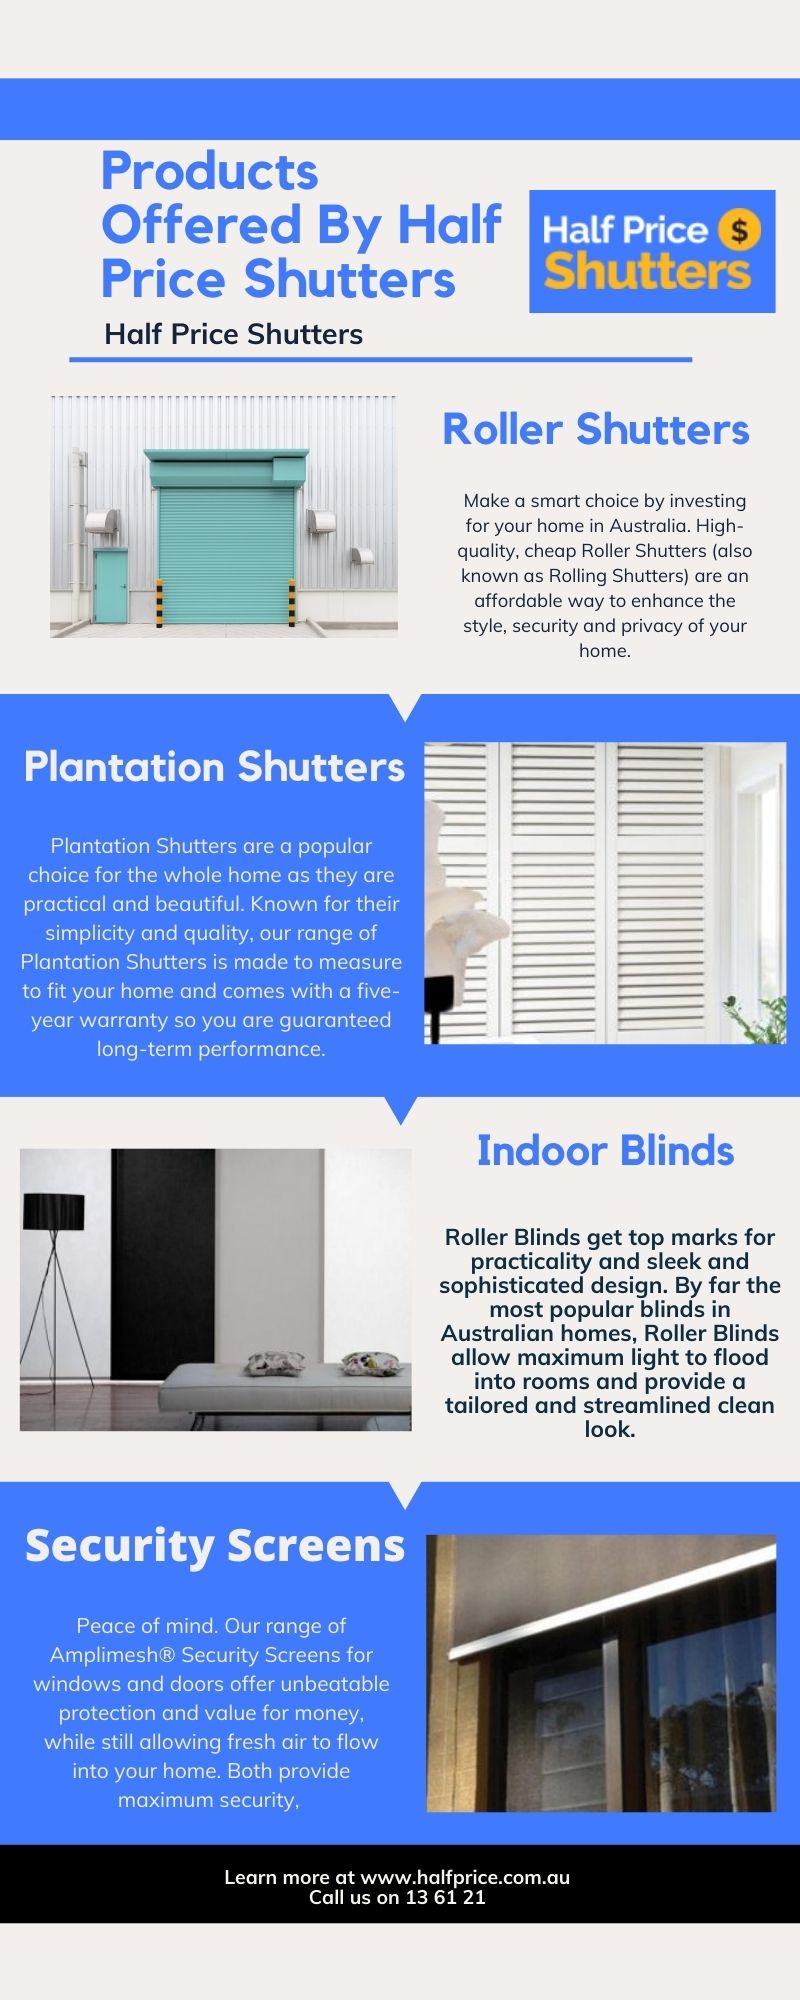 Give your home a new look with products by Half Price Shutters